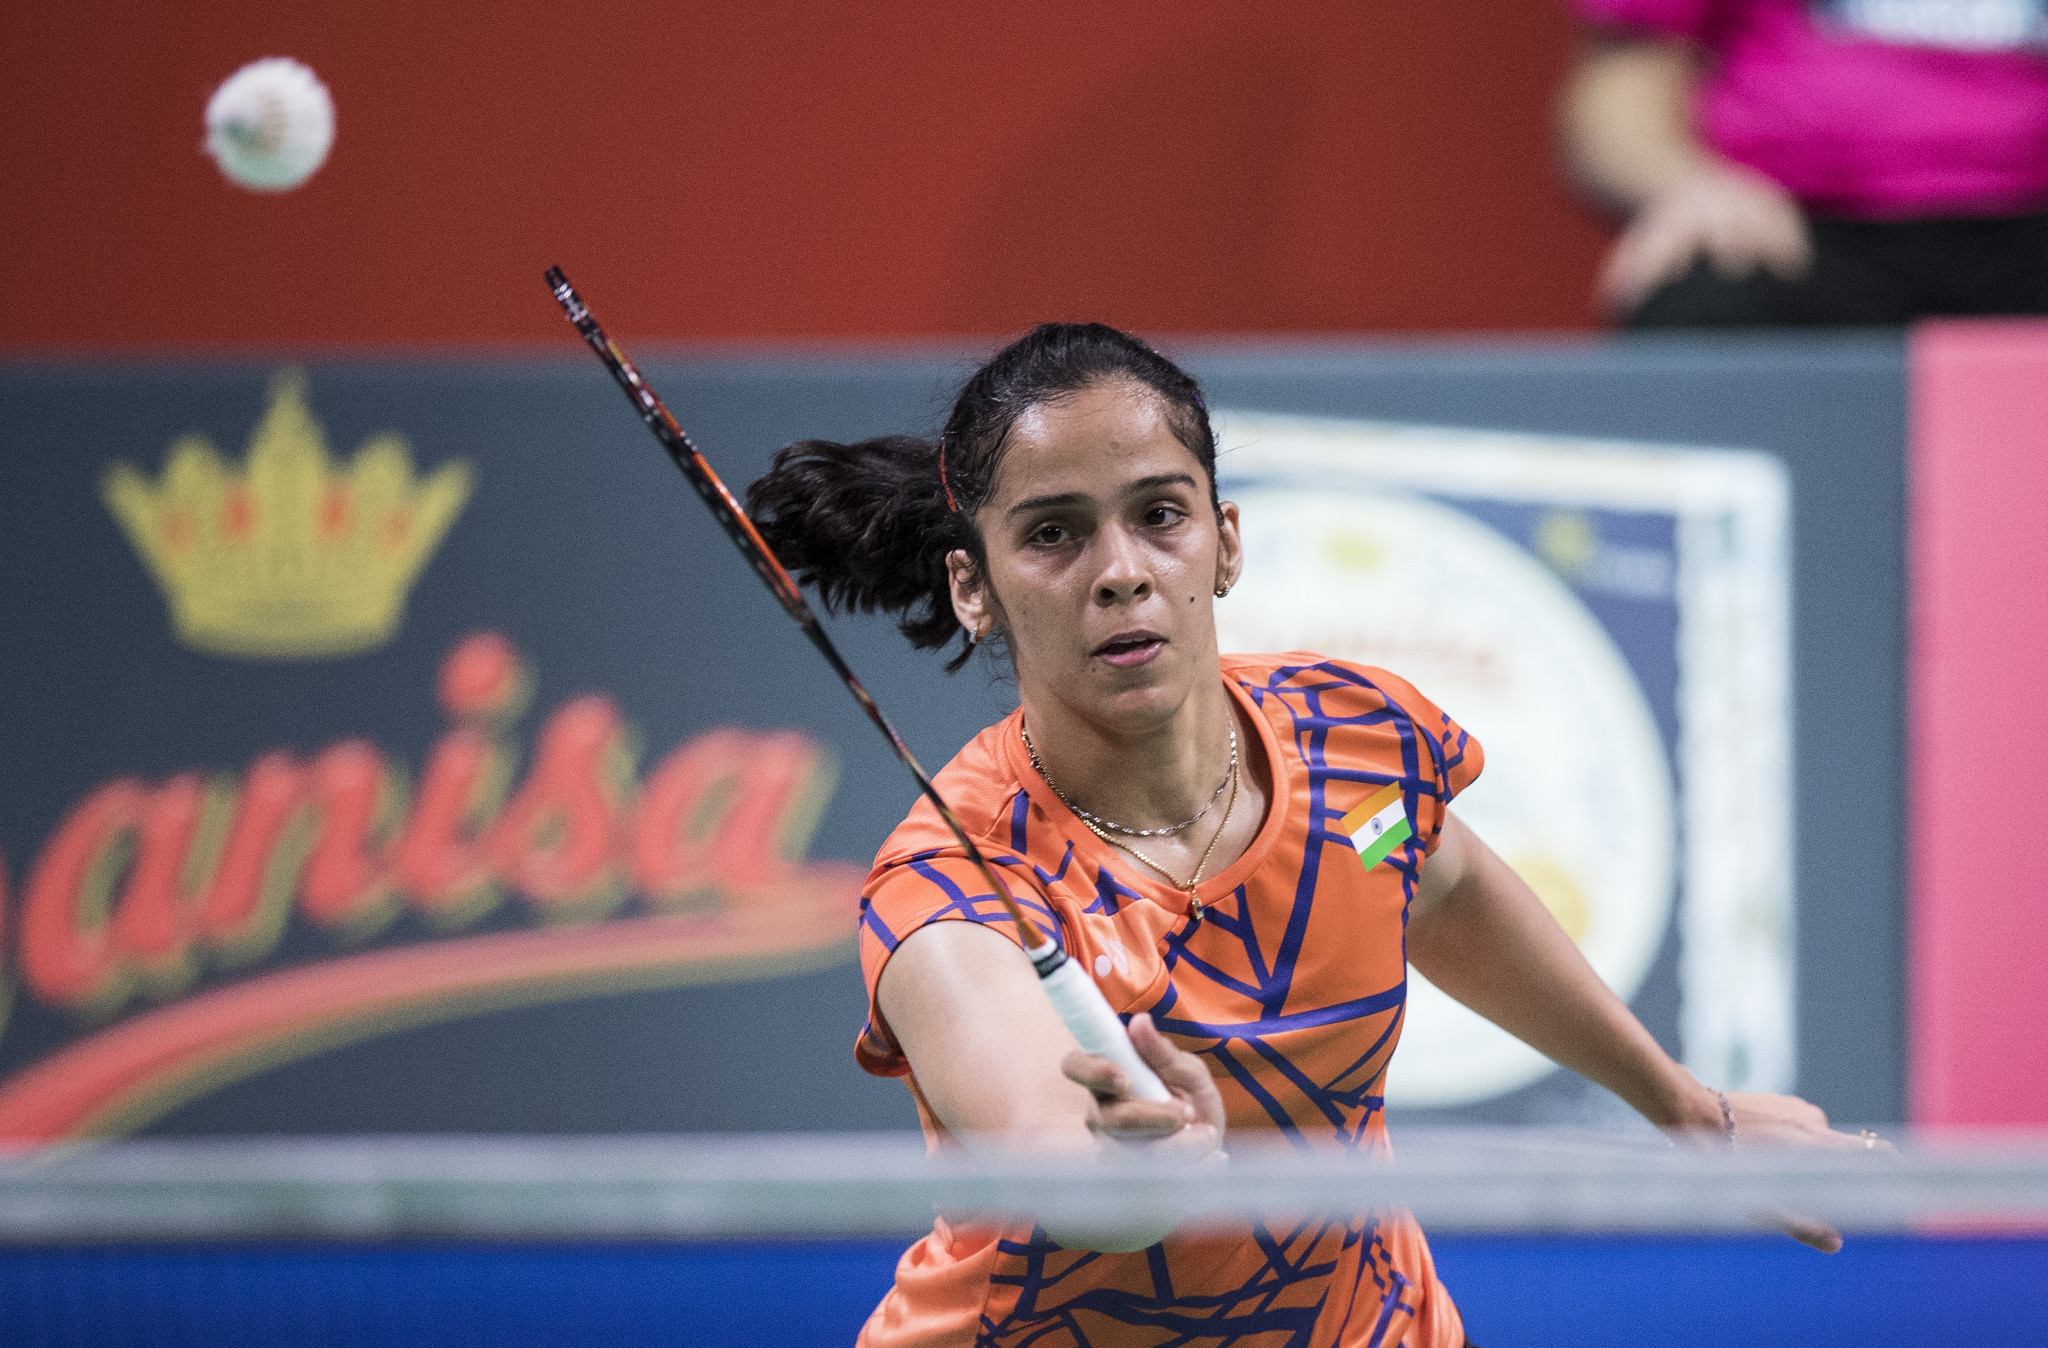 Home players march on at BWF Syed Modi International in India